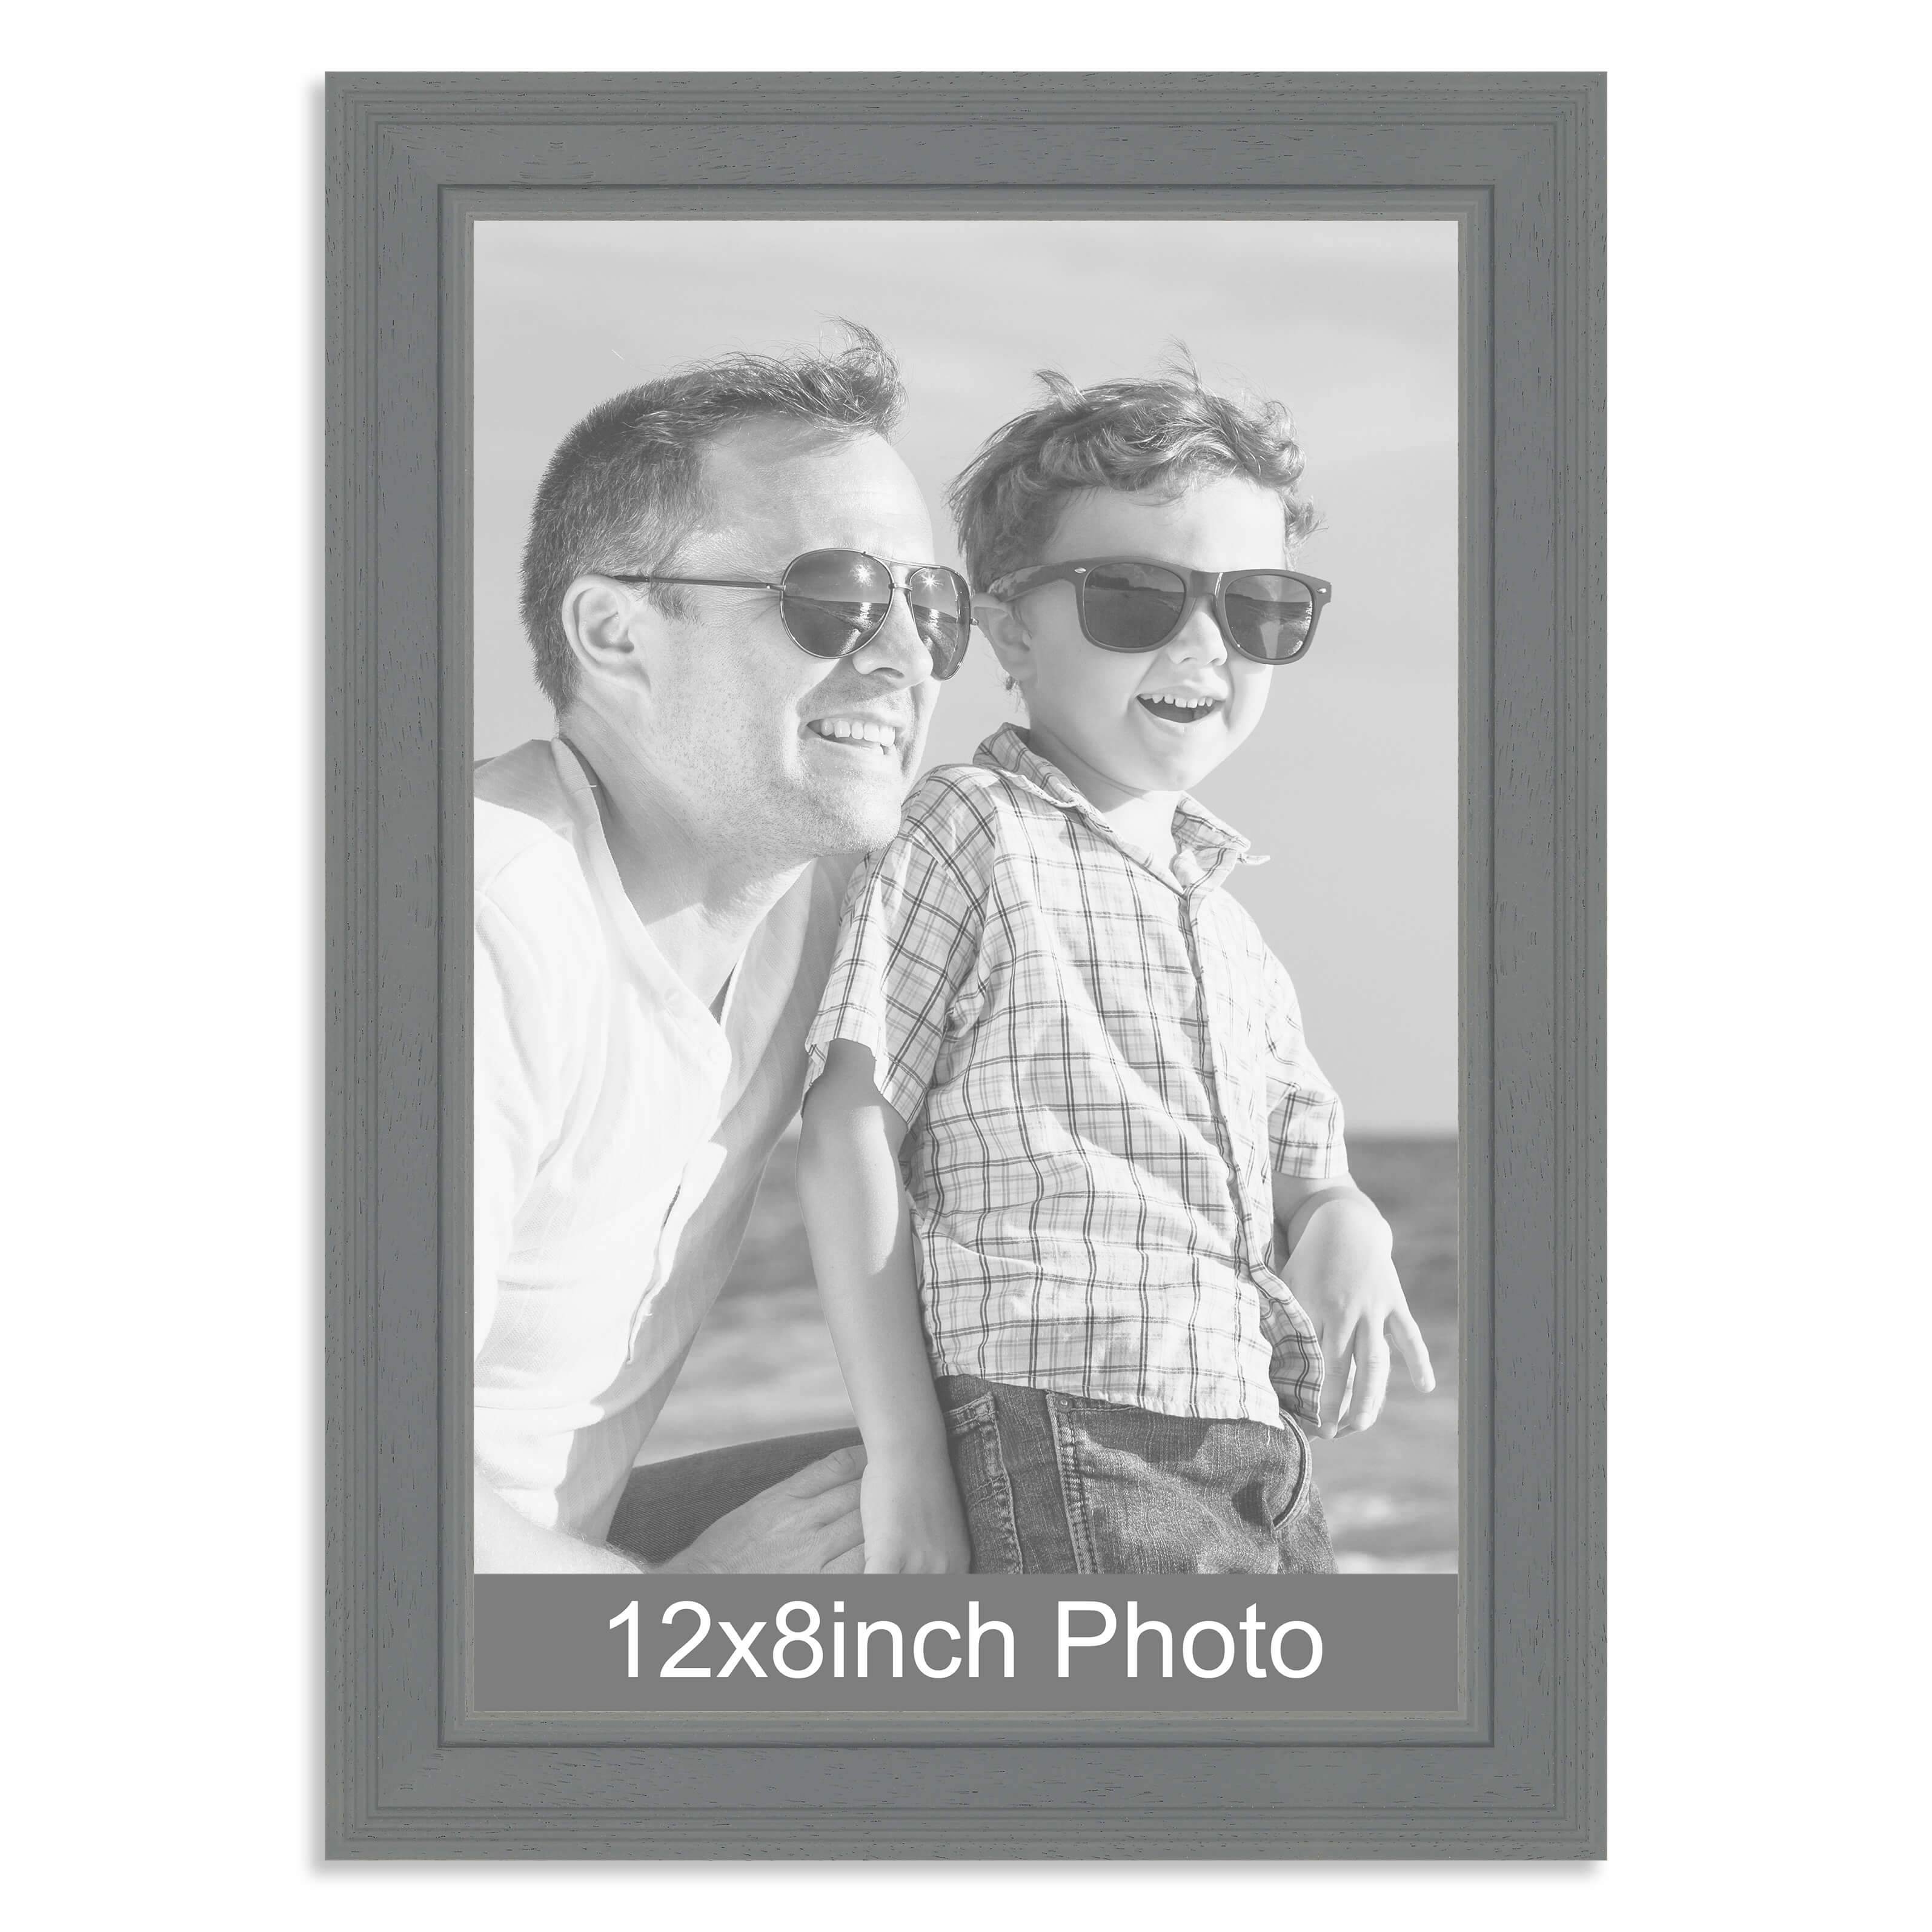 12 x 8inch Grey Wooden Photo Frame for a 12×8/8x12in photo